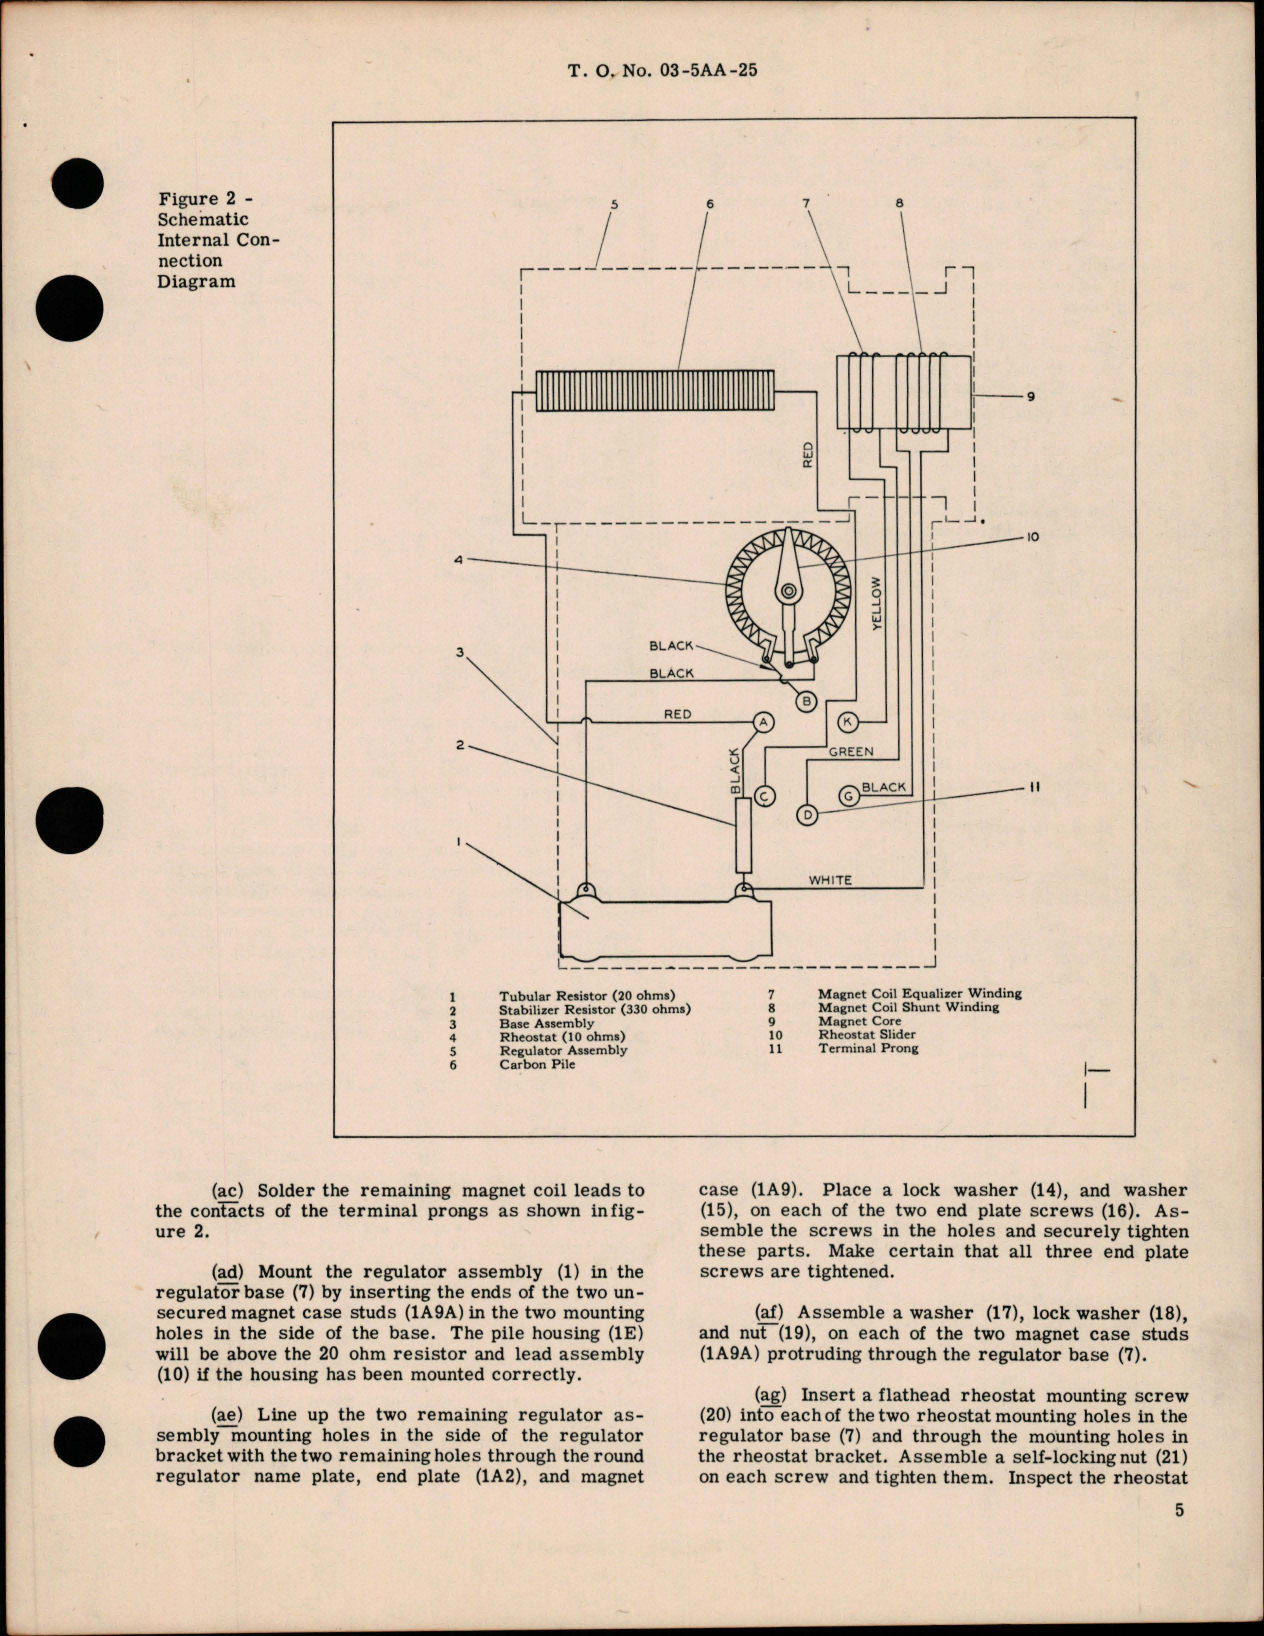 Sample page 5 from AirCorps Library document: Modification of Generator Voltage Regulators - Parts 1042-2A and 1042-6A